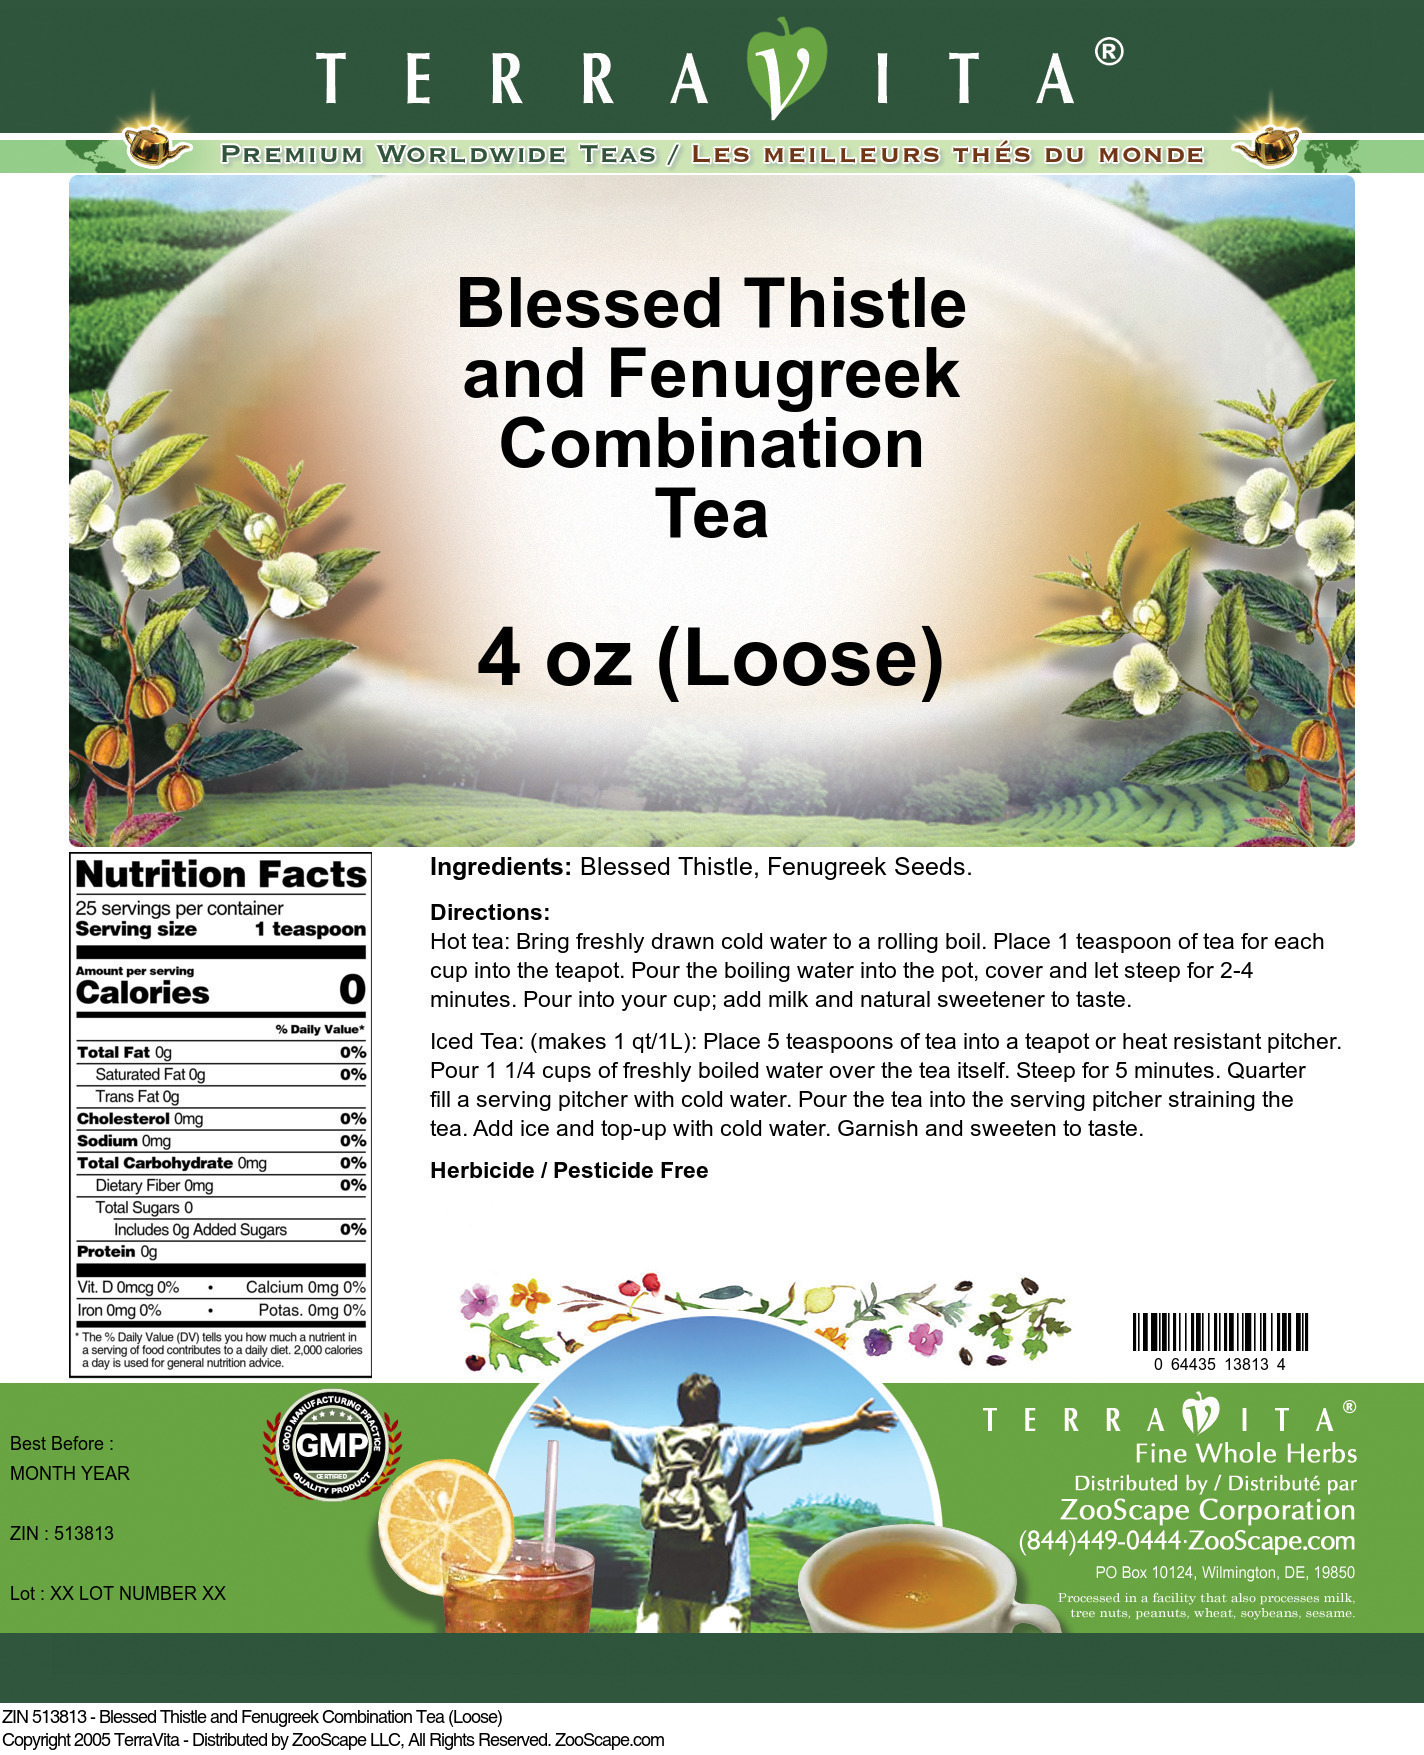 Blessed Thistle and Fenugreek Combination Tea (Loose) - Label